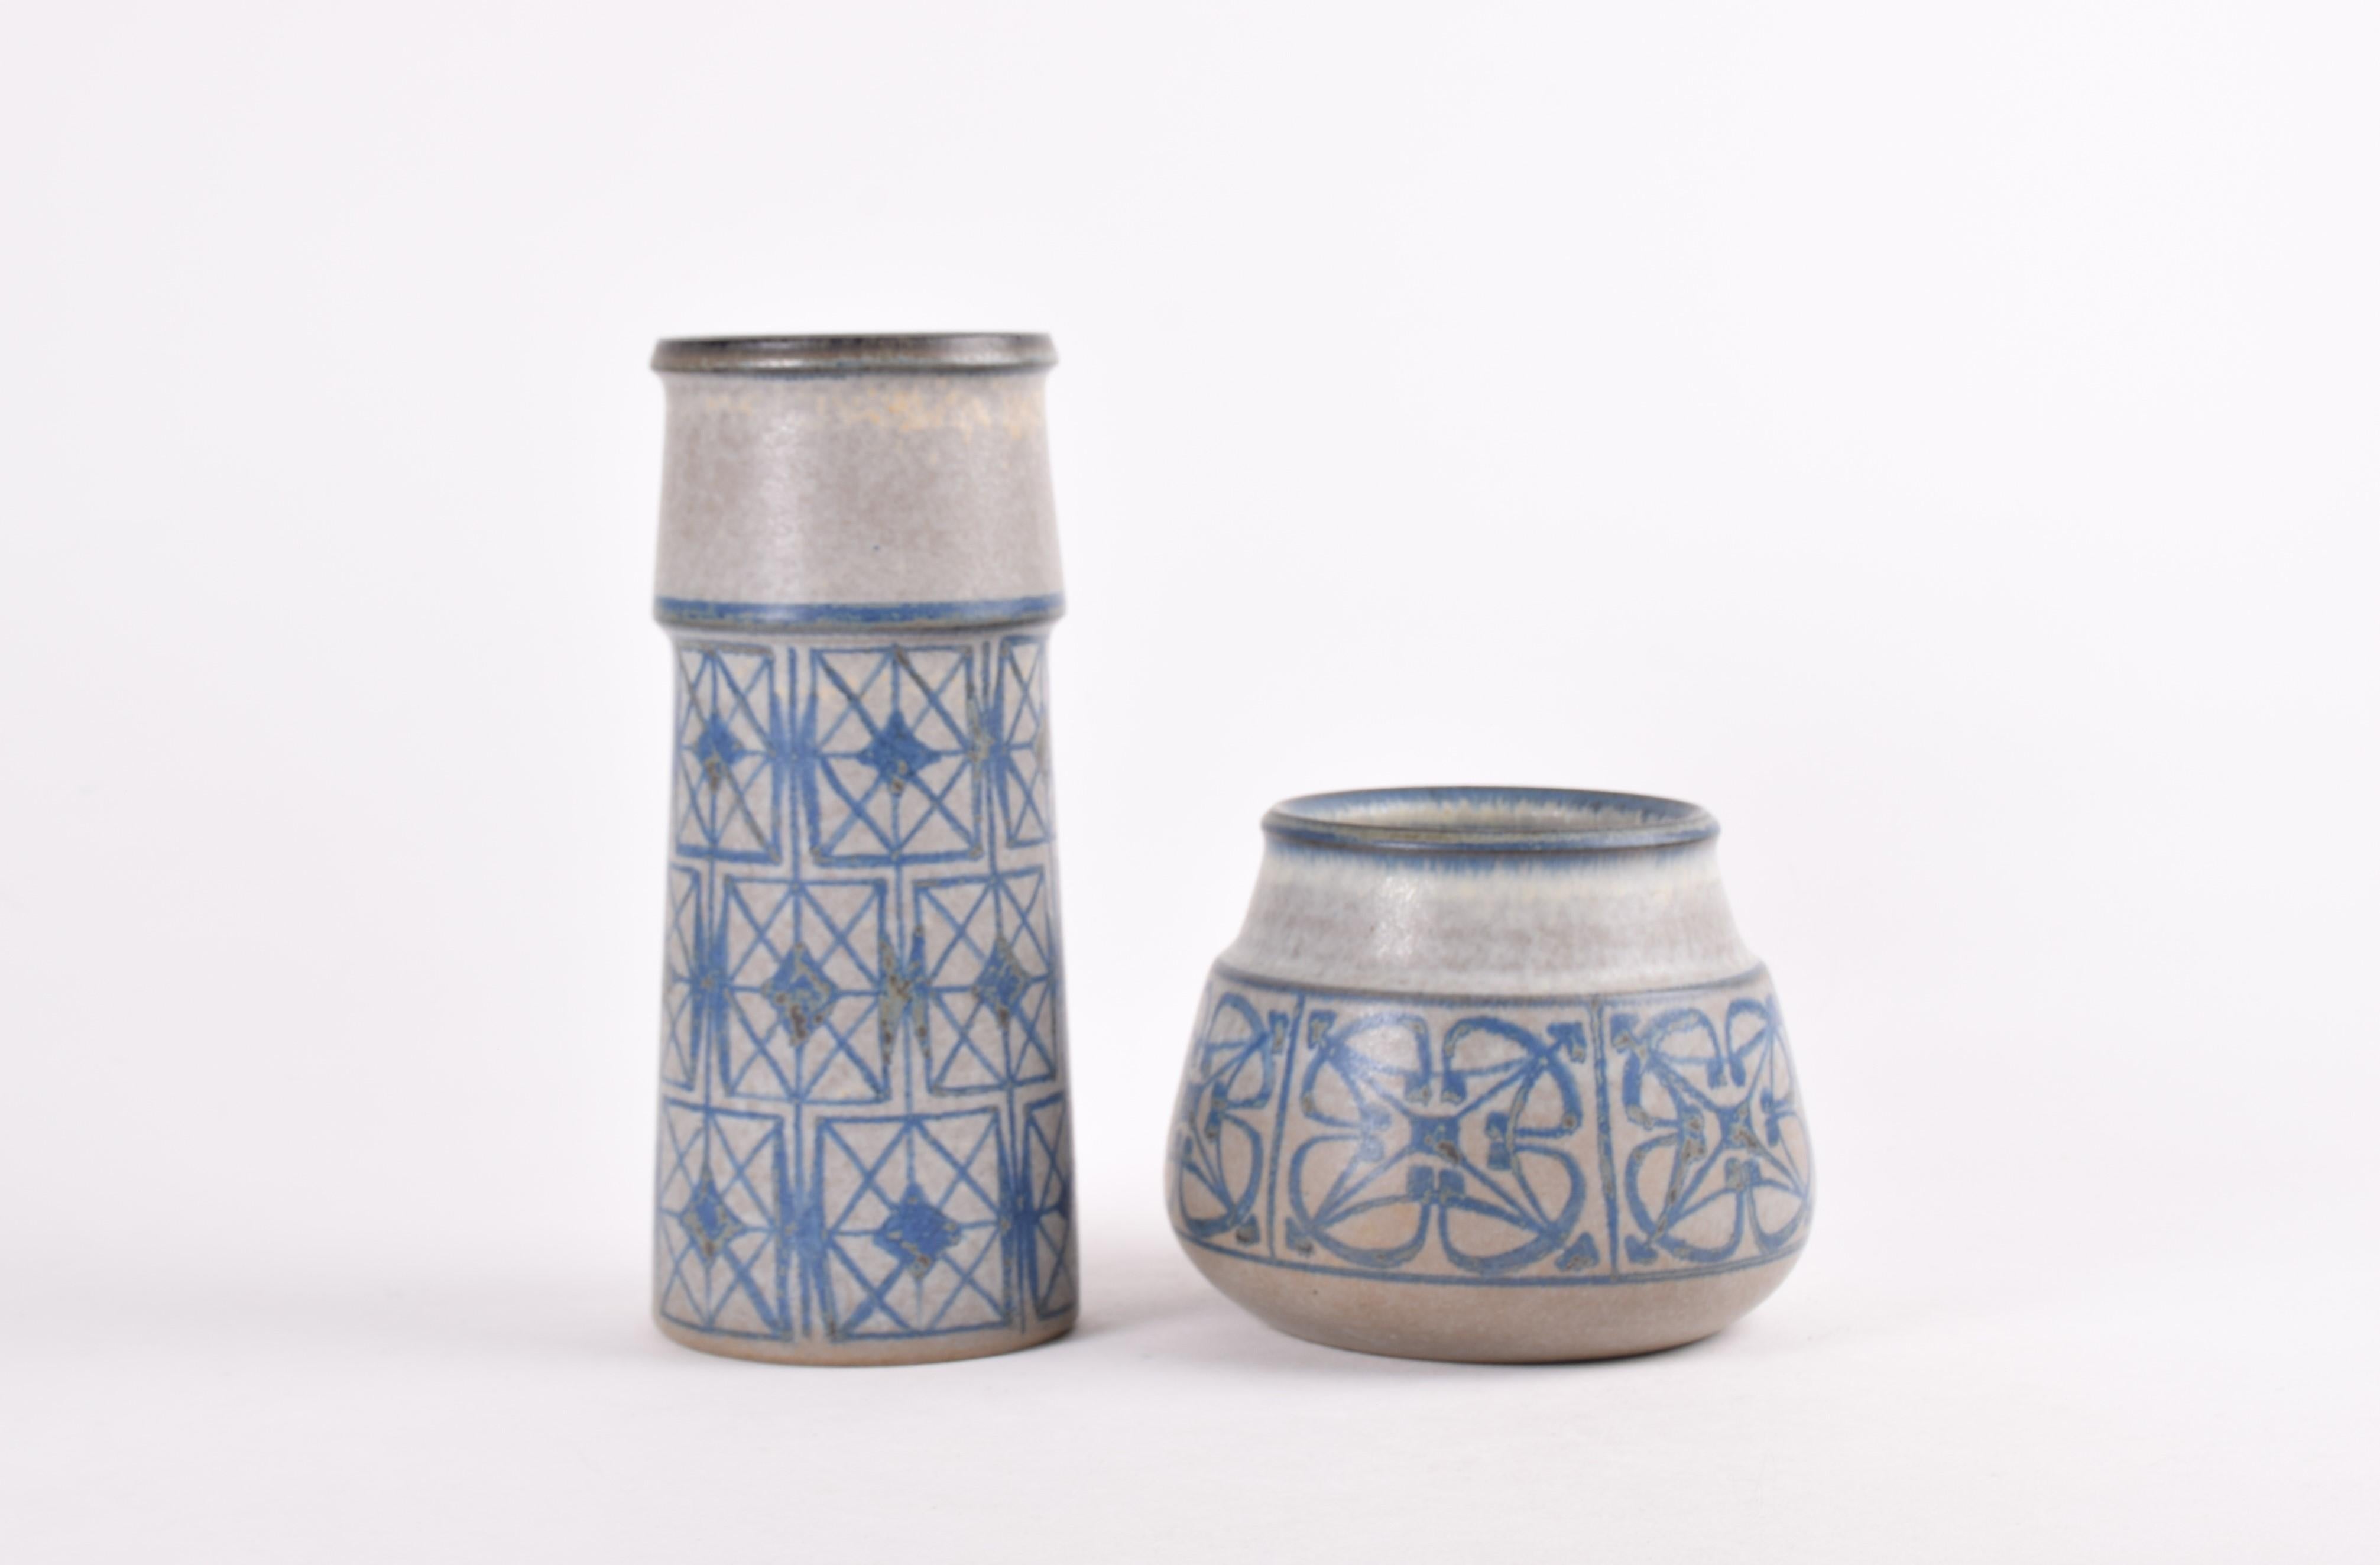 Set of two midcentury Danish vases designed by Marianne Starck for Michael Andersen & Søn and made circa 1960s. Both vases are made of stoneware and belong to the same series.

They both have a matte gray, blue and brownish glaze.

Tall vase: